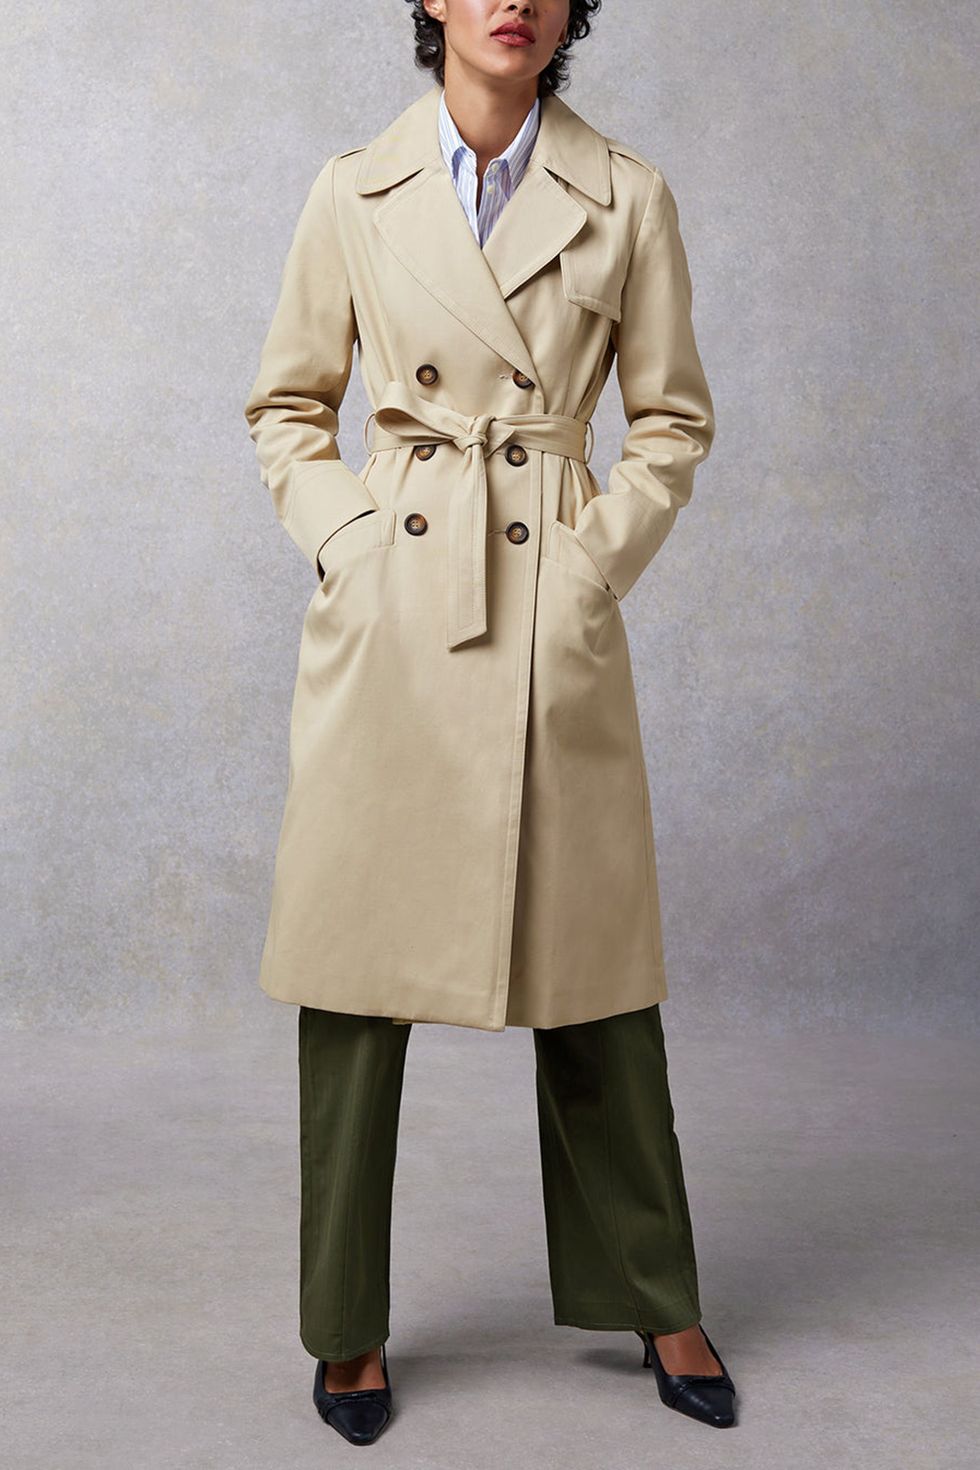 The 20 Best Trench Coats for Women That Will Outlast the Trend Cycle - Best  Trench Coats